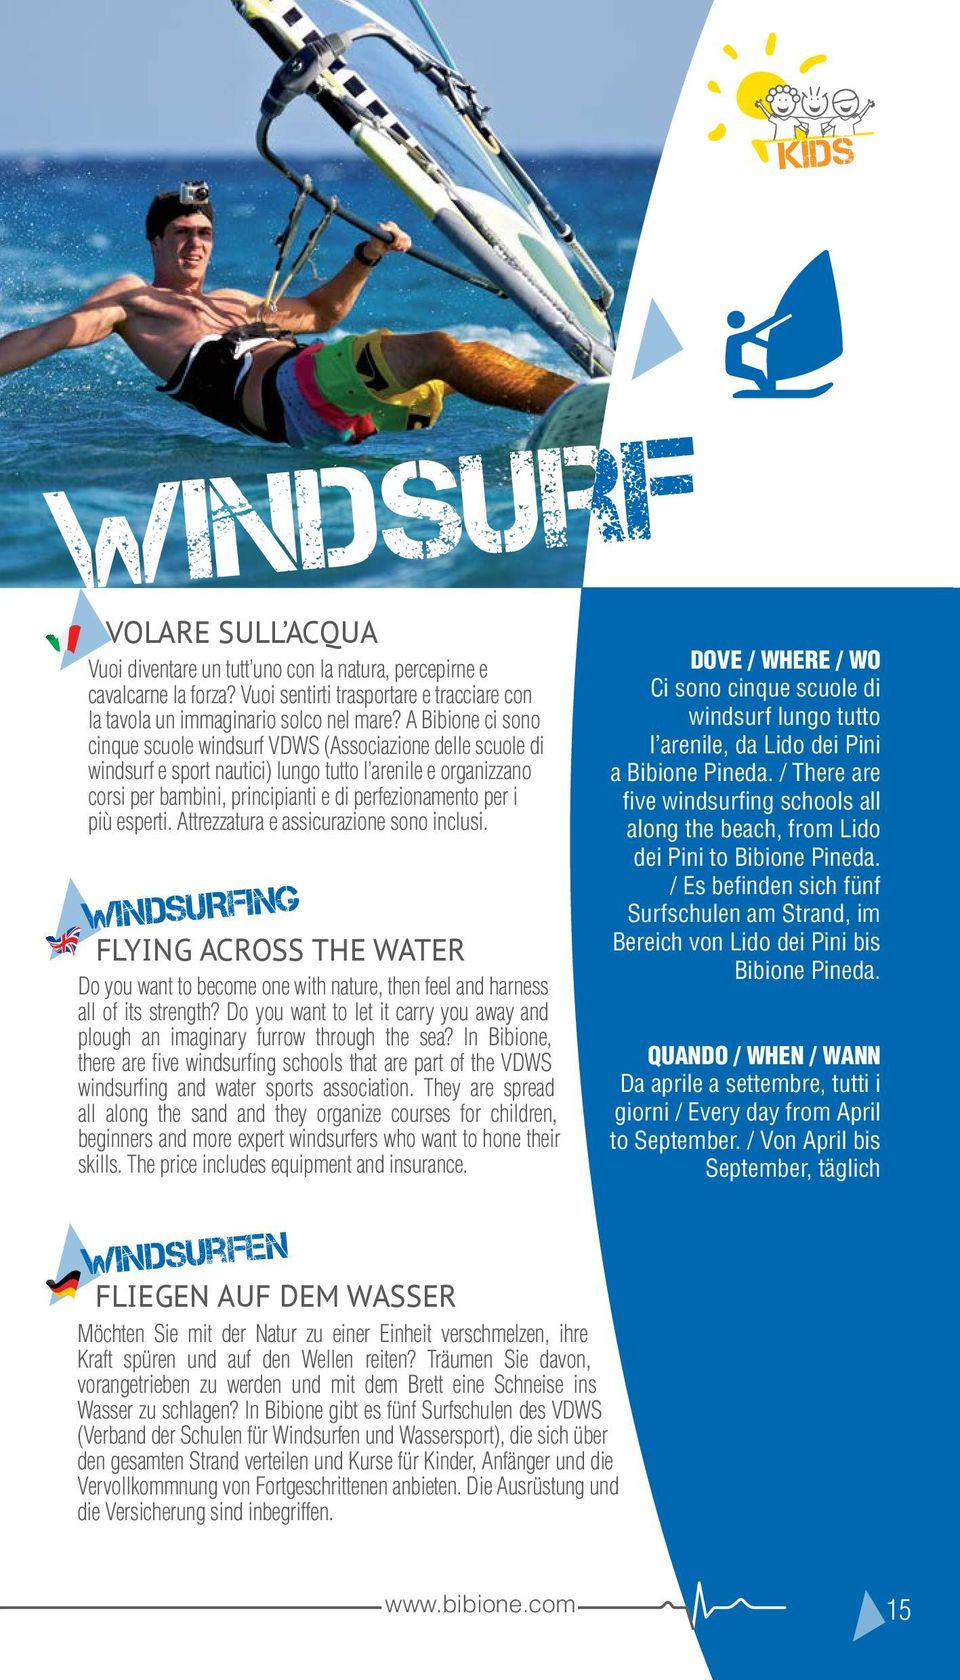 più esperti. Attrezzatura e assicurazione sono inclusi. WINDSURFING FLYING ACROSS THE WATER Do you want to become one with nature, then feel and harness all of its strength?